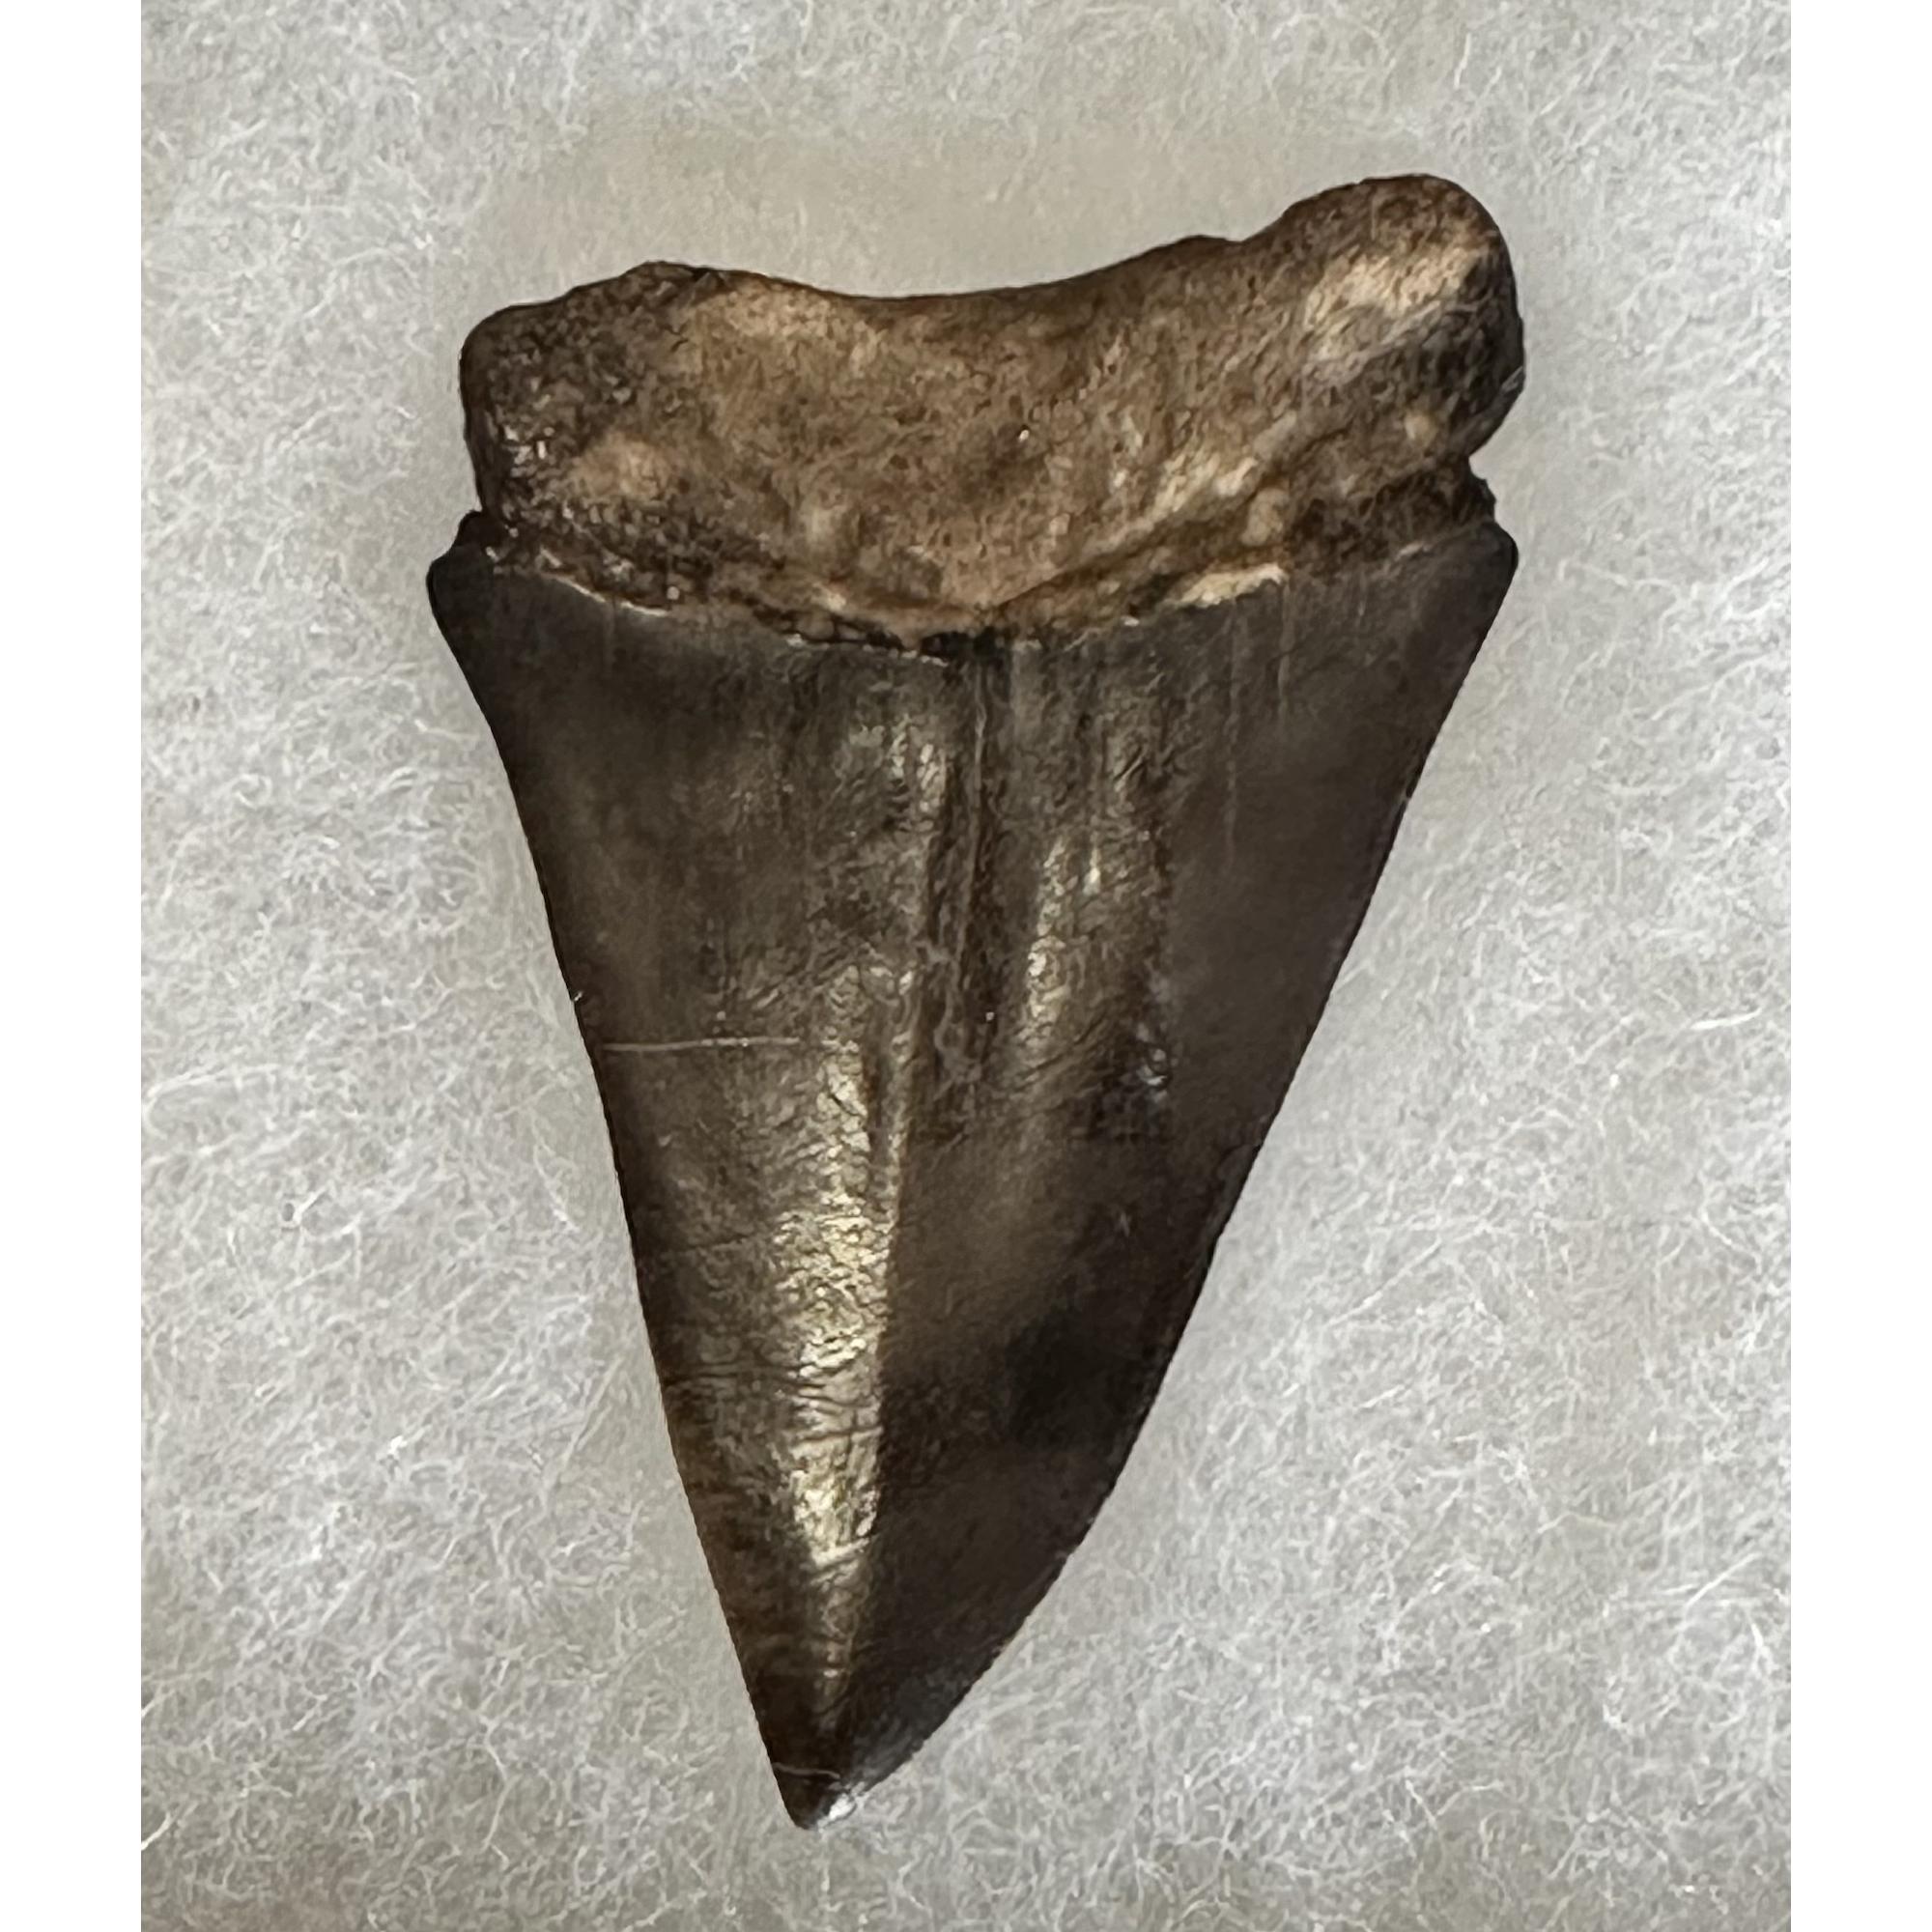 Mako Shark Tooth, 2 1/2 inches Prehistoric Online